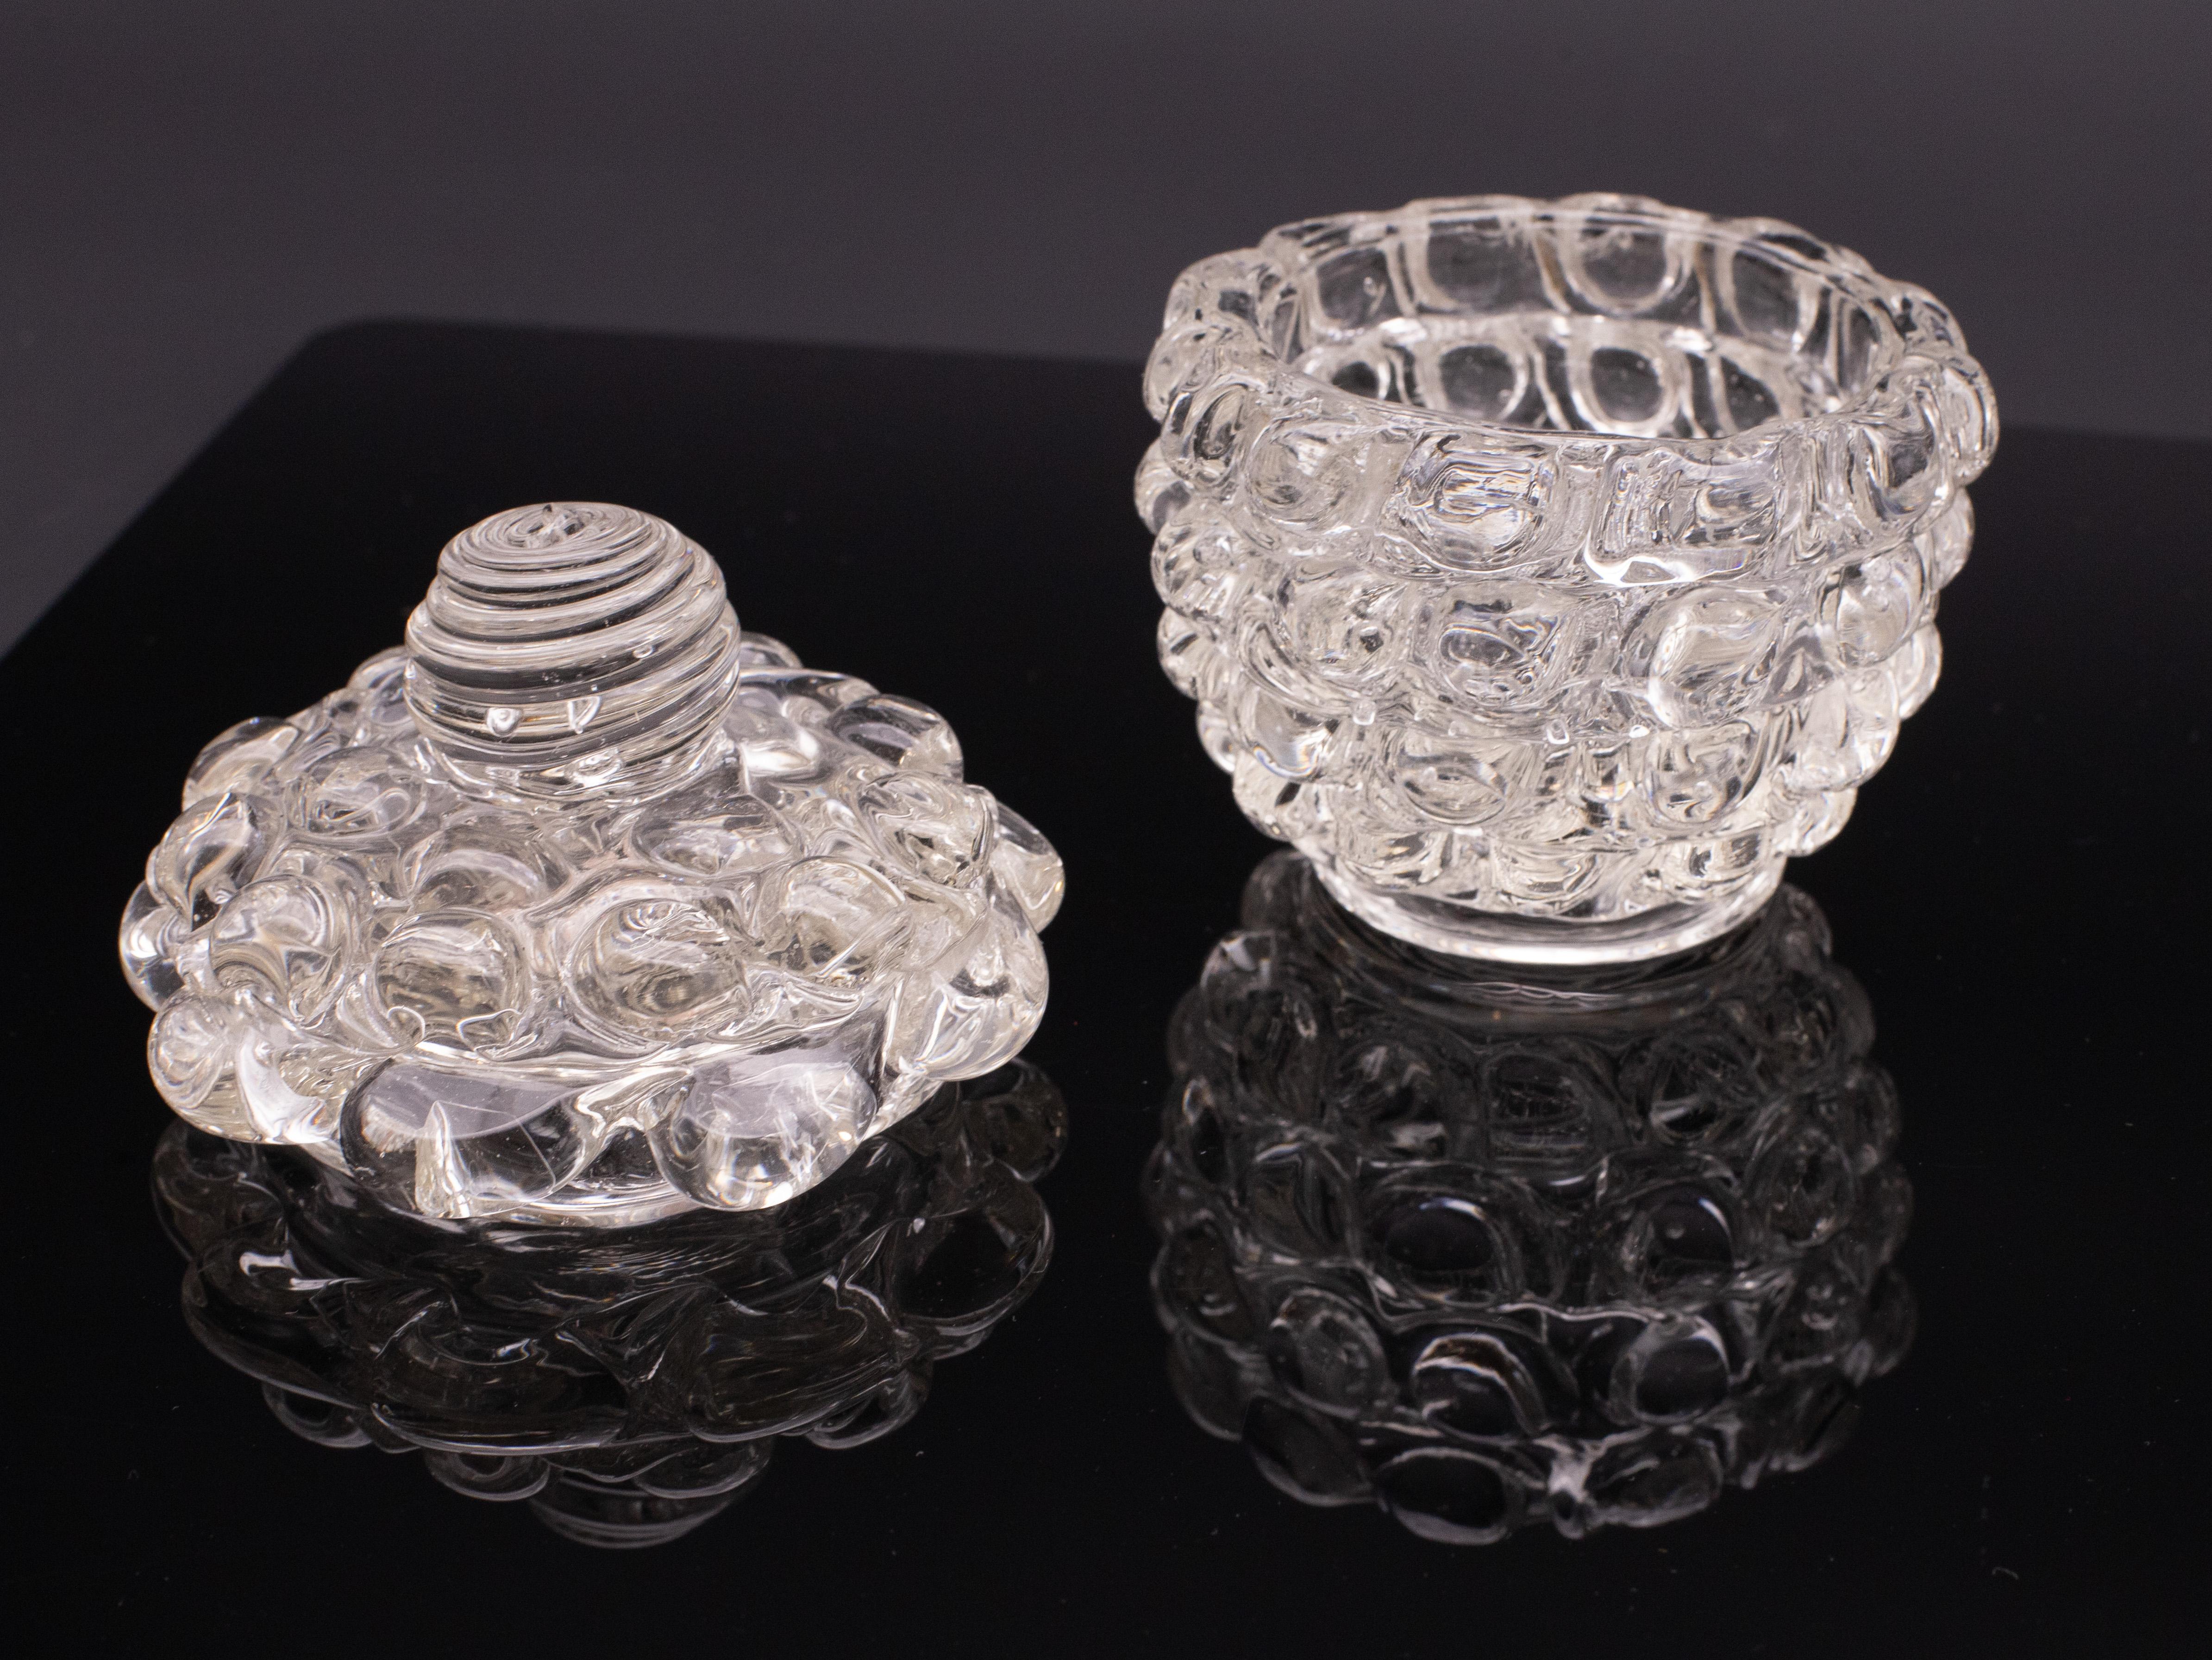 Set of 3 Series Lenti Vase Barovier & Toso Italy, Murano Glass, 1940s For Sale 7